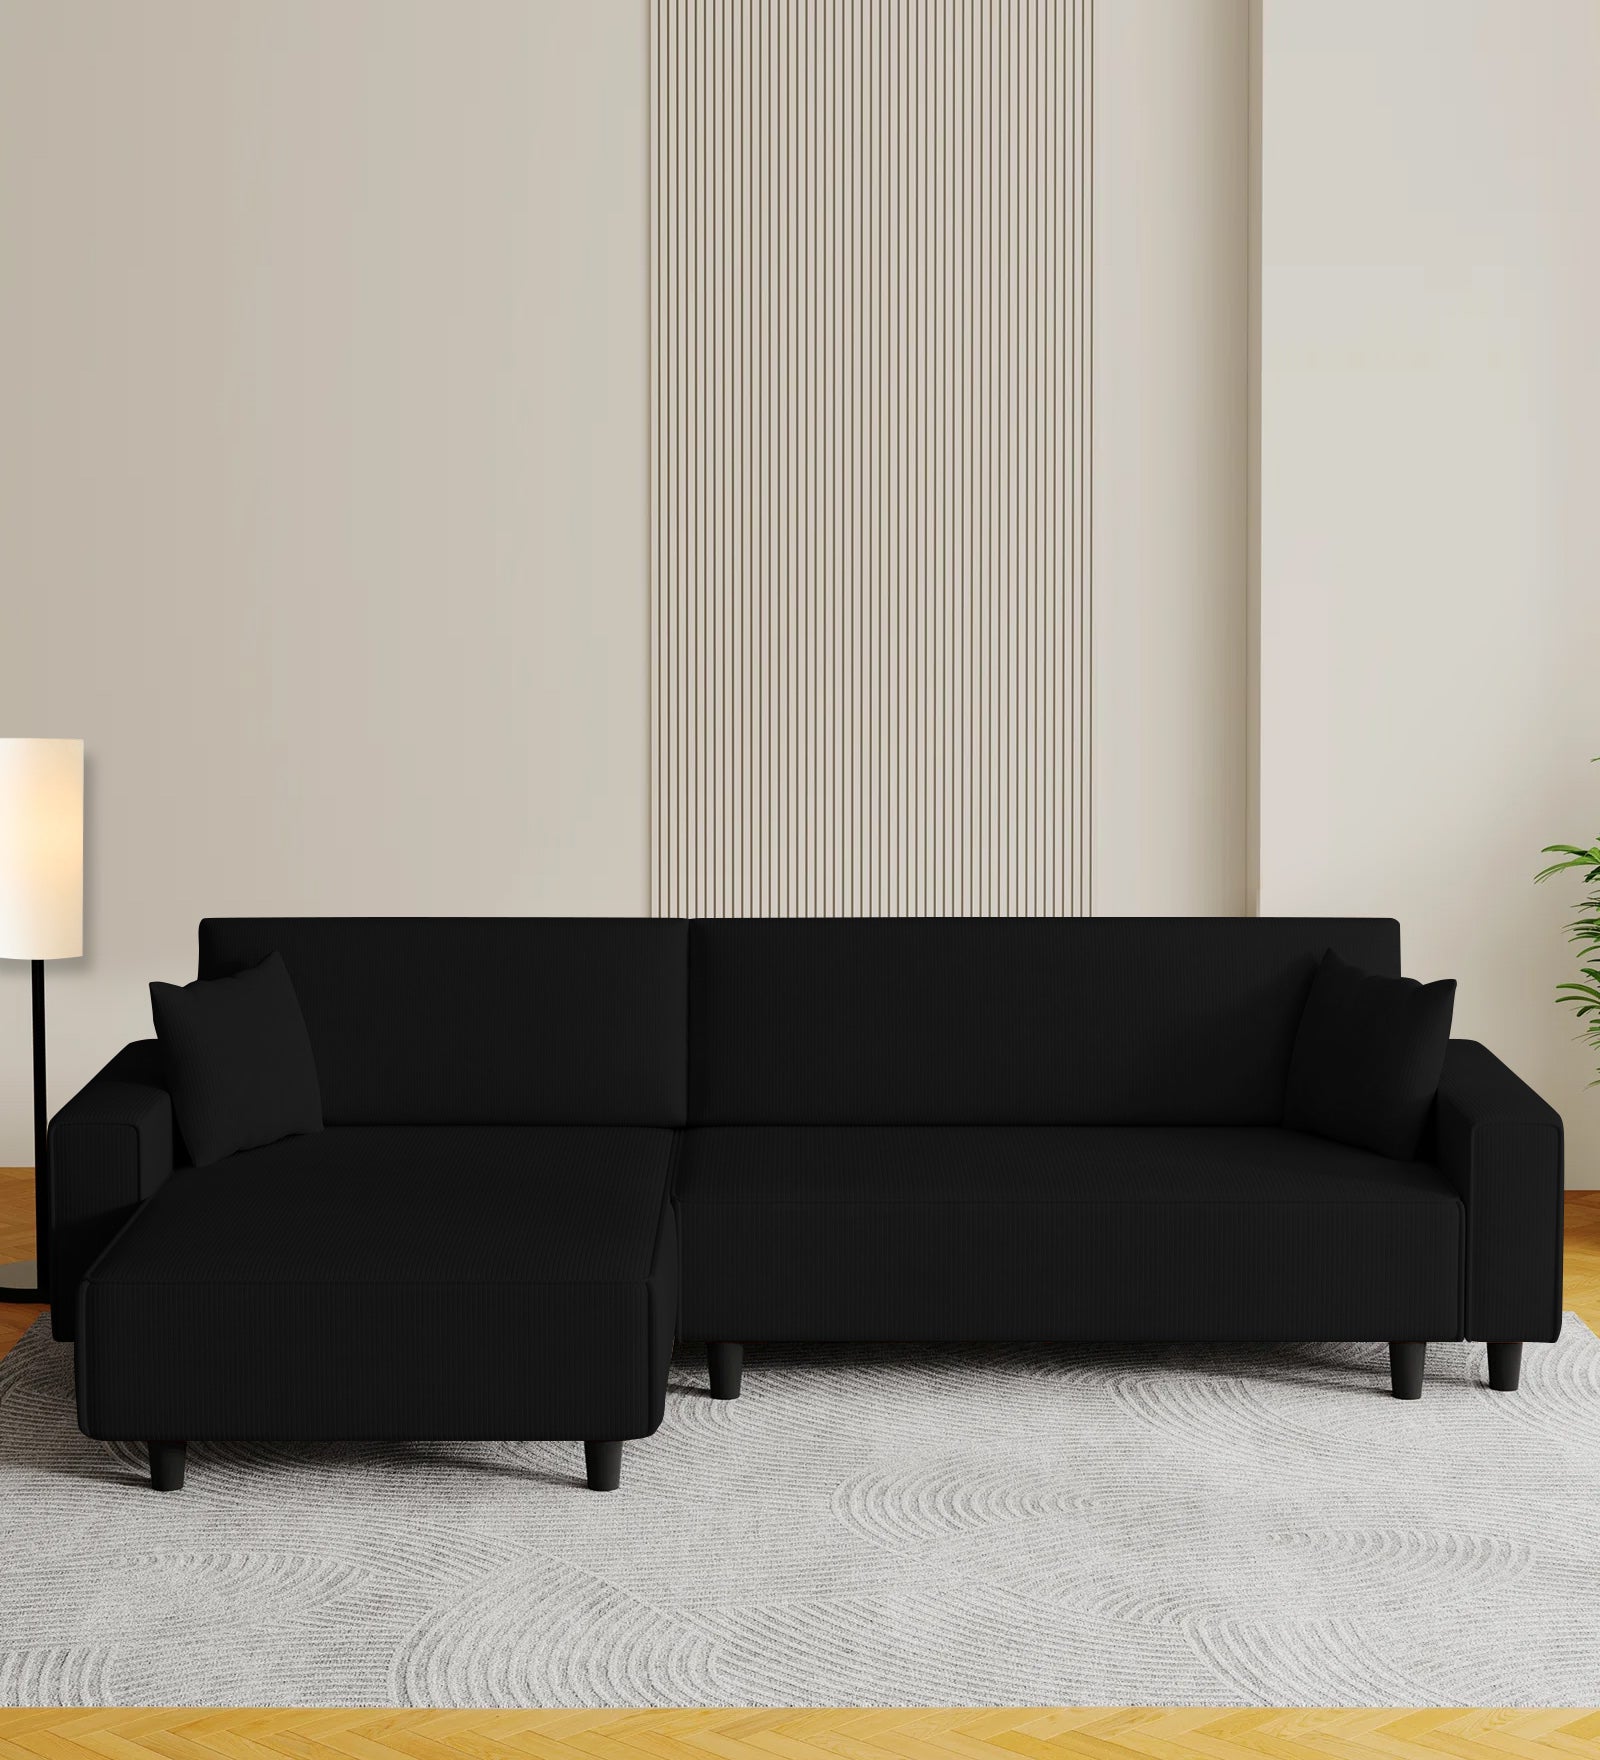 Peach Fabric RHS 6 Seater Sectional Sofa Cum Bed With Storage In Zed Black Colour